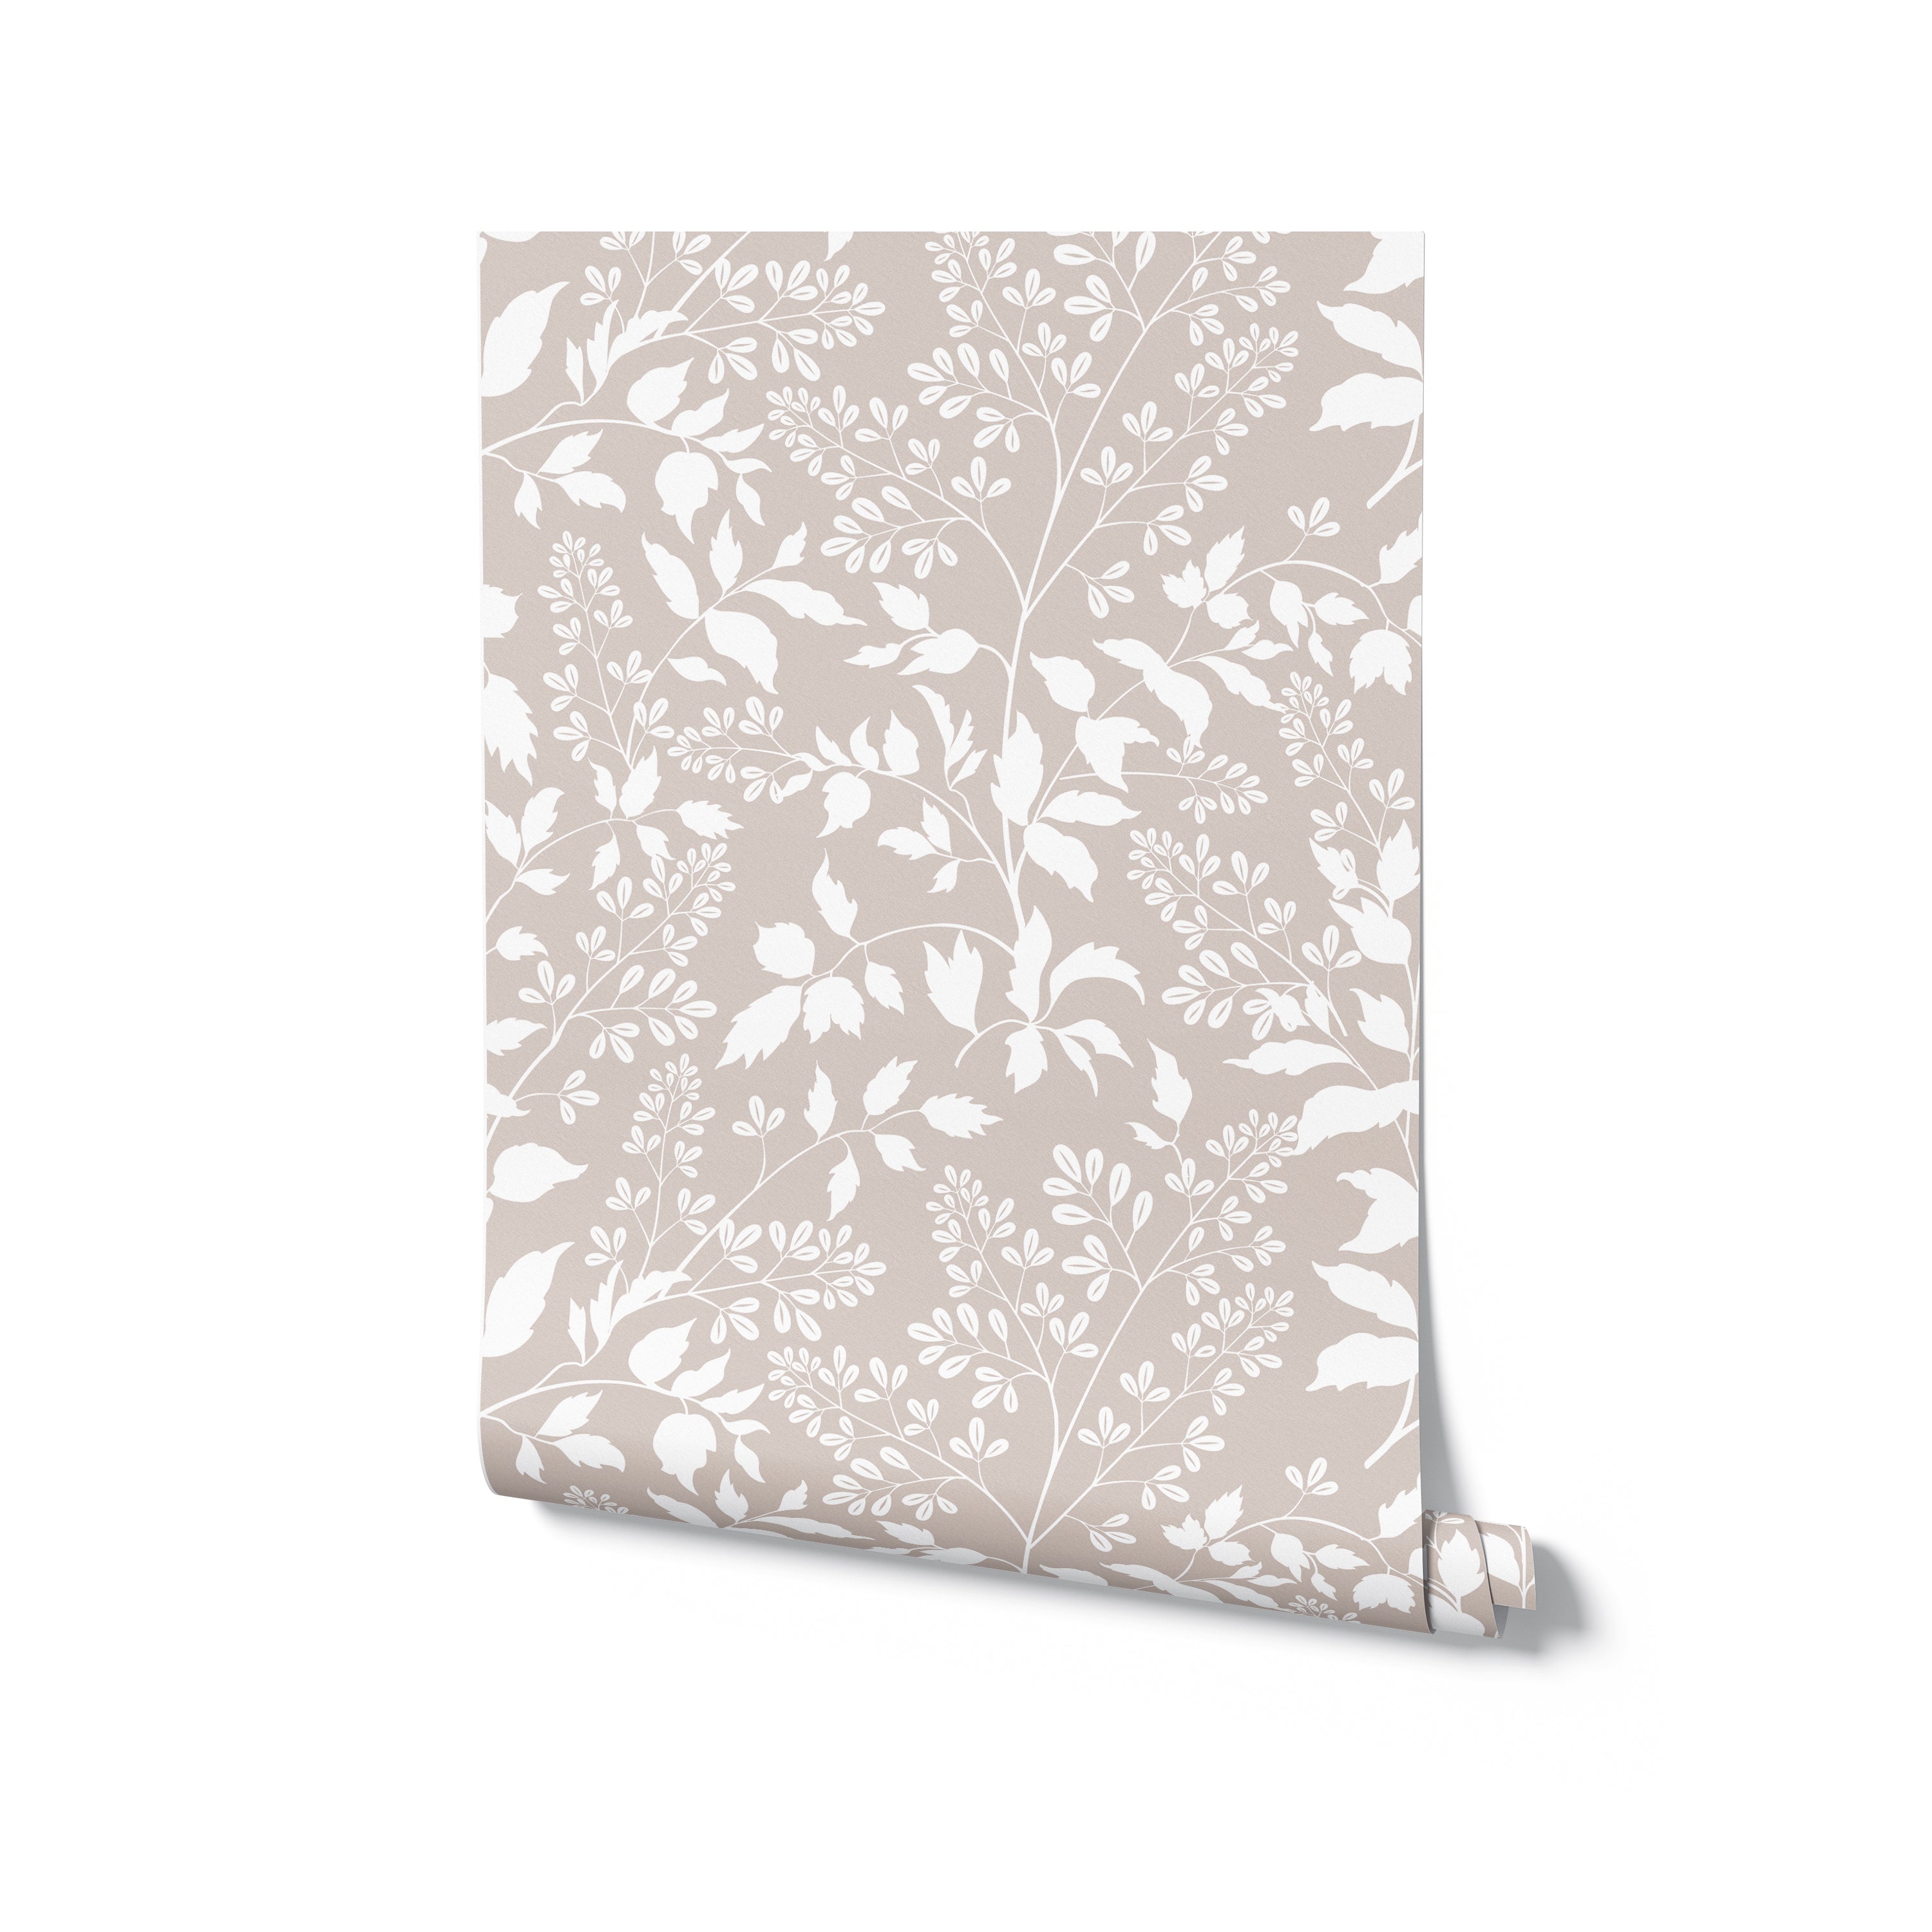 A roll of Pressed Branches Wallpaper displaying its elegant white botanical pattern of leaves and branches on a beige background, ready to enhance any room with its natural charm